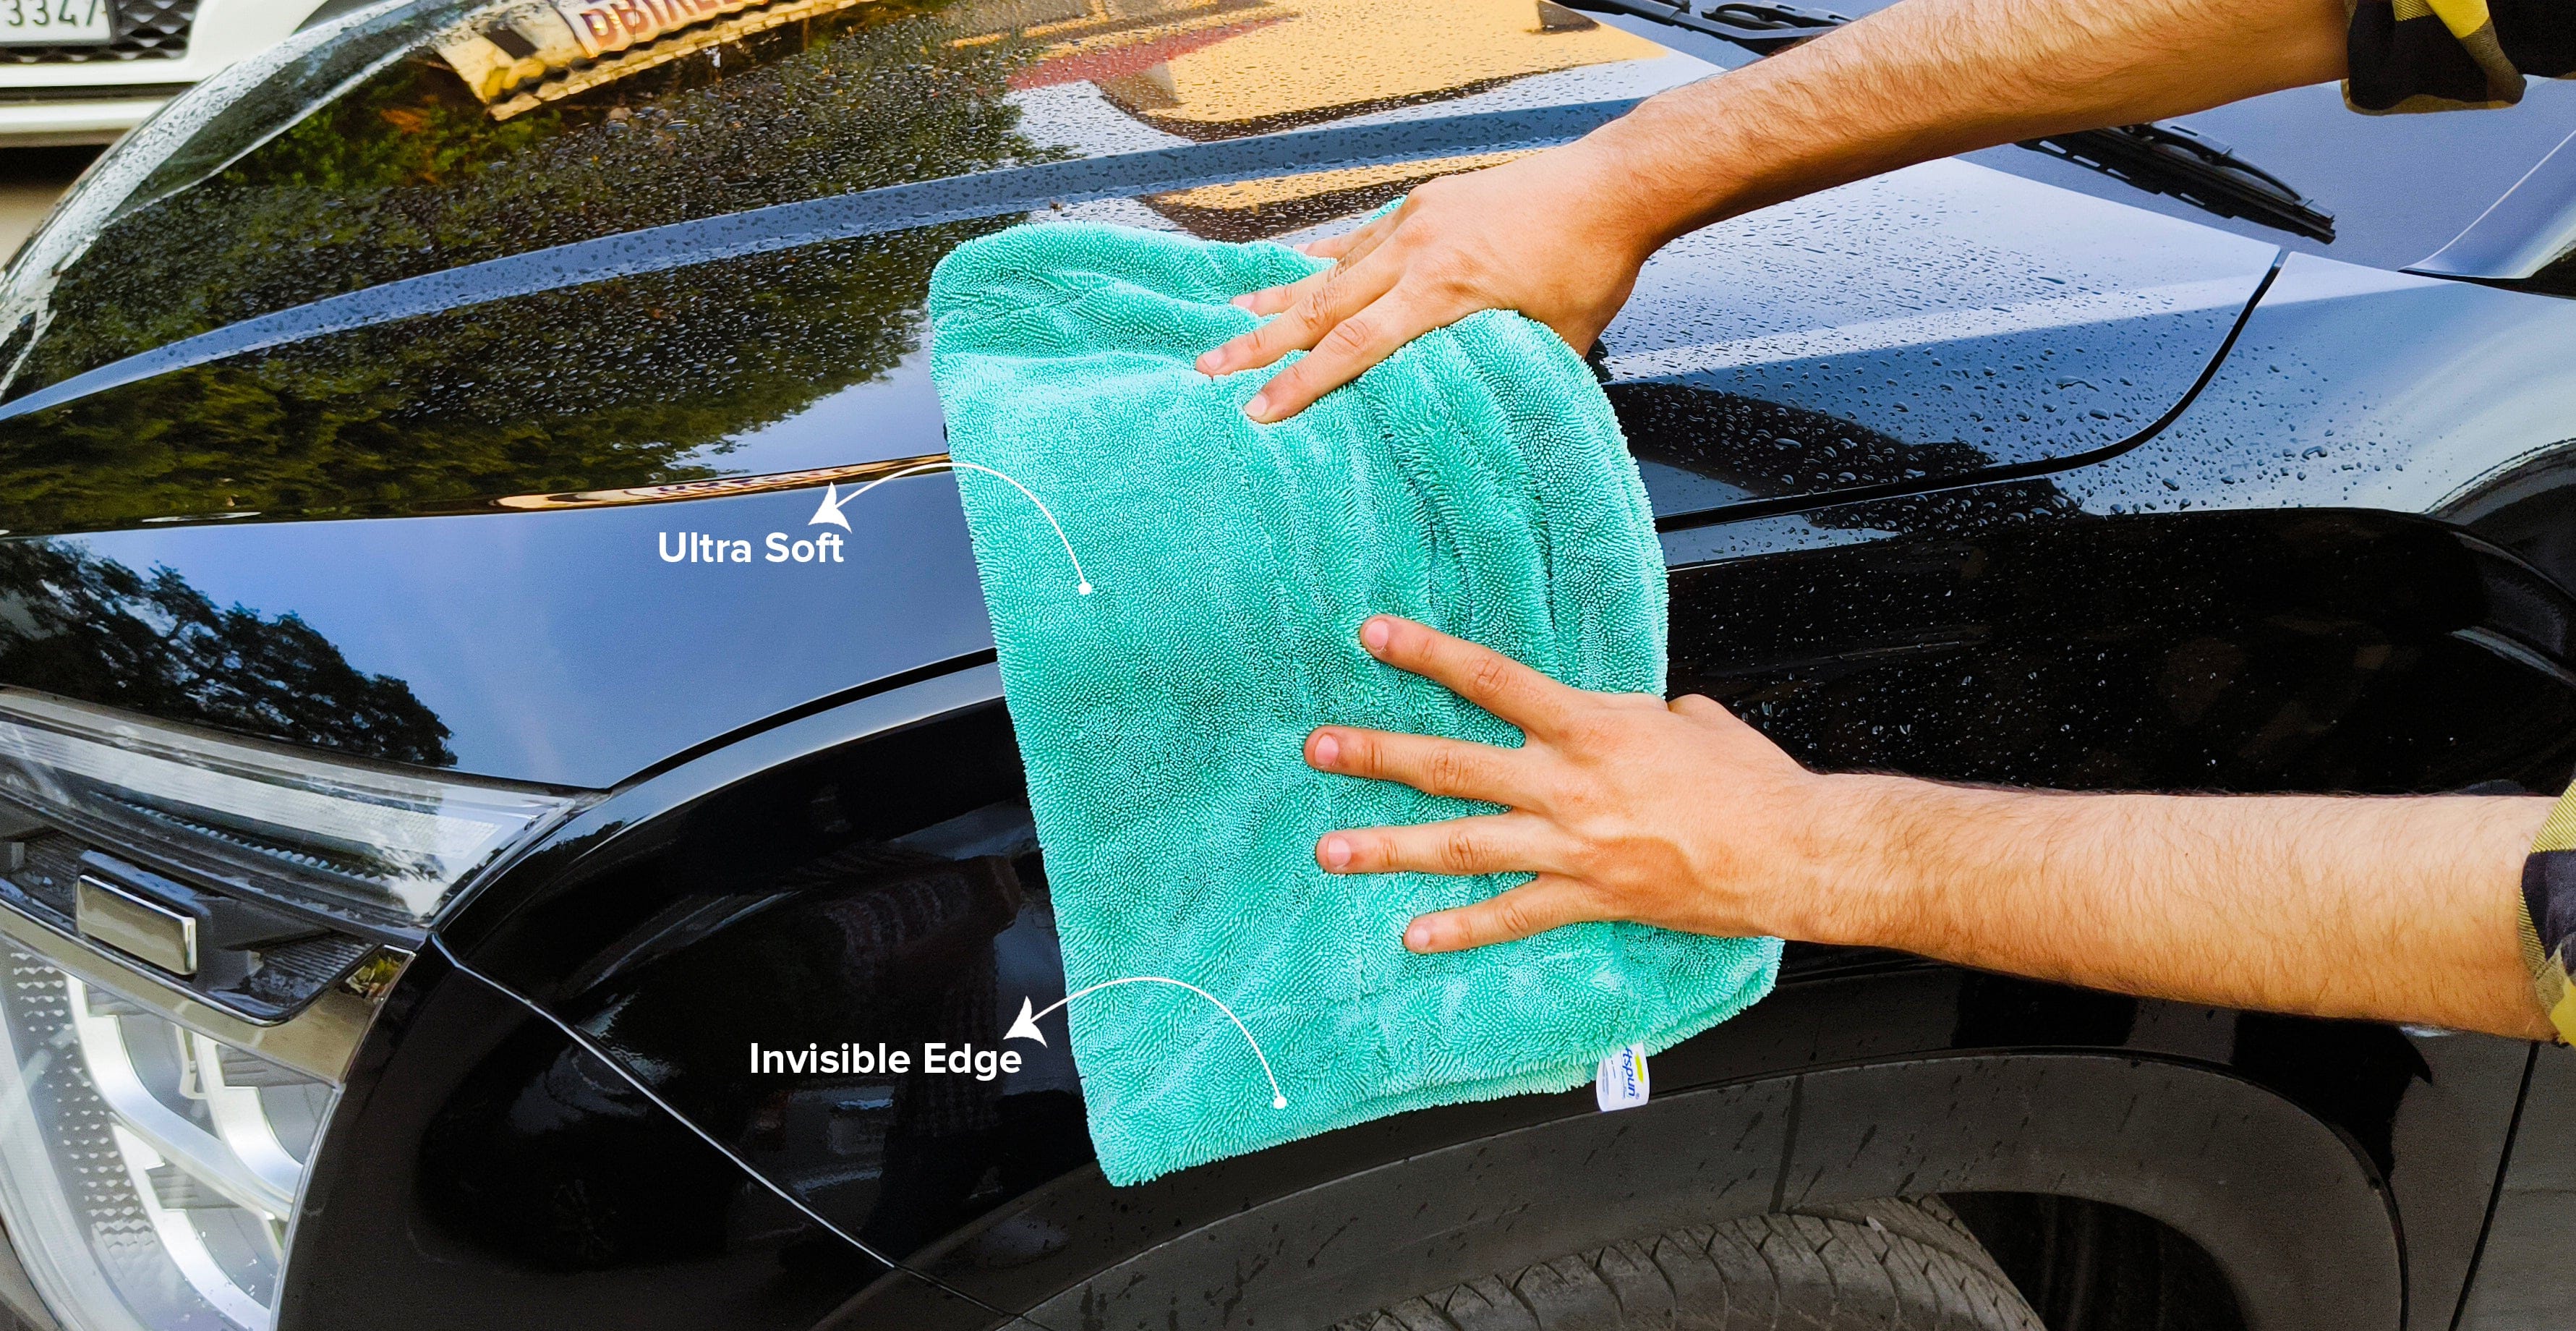 SOFTSPUN Microfiber Cloth for Car - 1600 GSM, Twisted Loop Super Absorbent Towel - Edgeless Design with Plush Pile and Lint Free Cloth for Drying and Detailing.